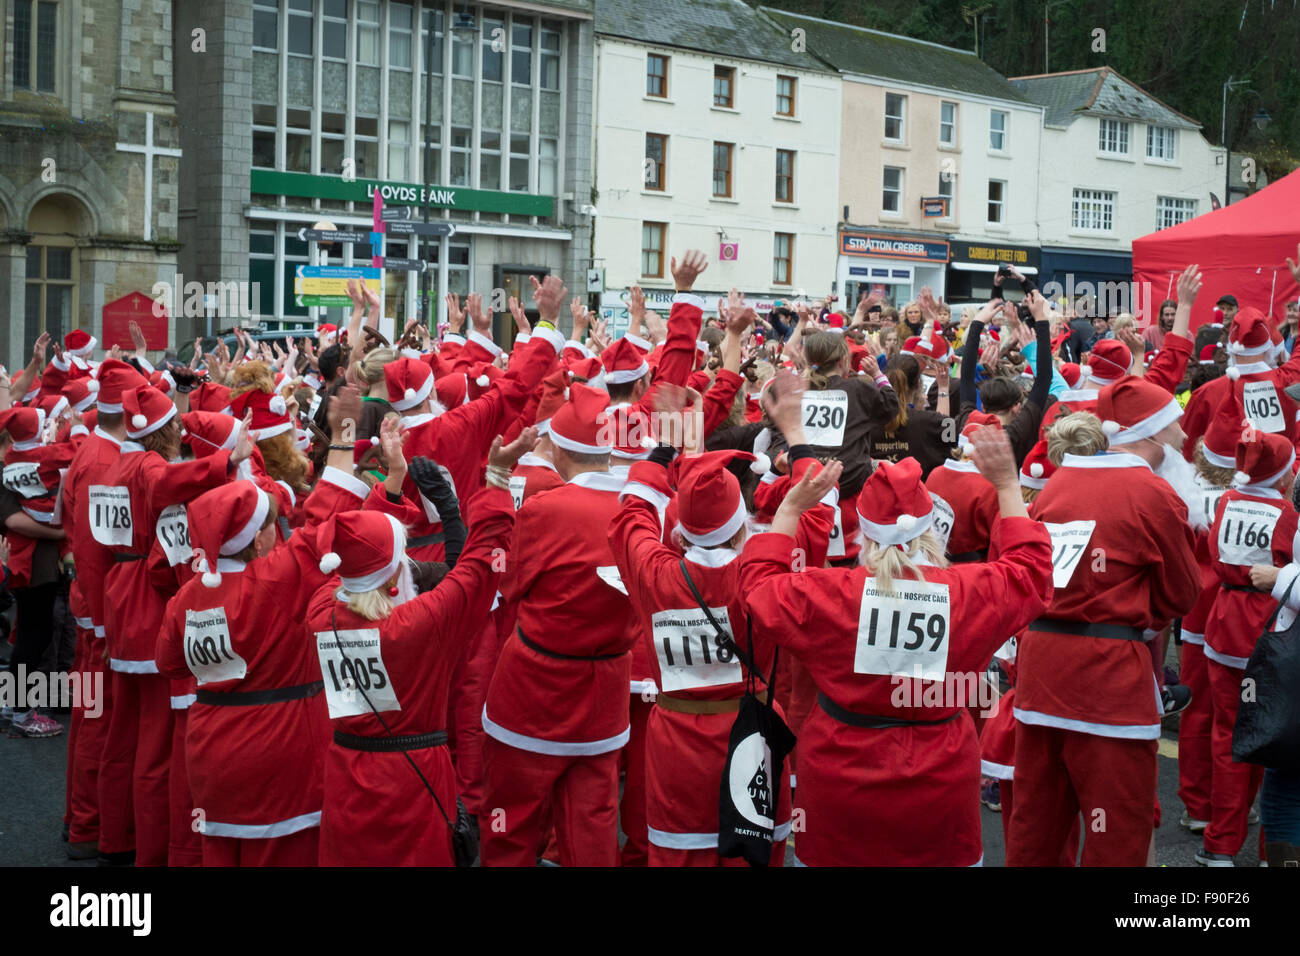 Falmouth, UK. 12th December, 2015. 100's of people took part in the Santa vs Rudolph fun run through Falmouth.  This is one in a series of 7 run, walk and surf events in the Santa series raising funds and awareness to support Cornwall Hospice Care. Credit:  Mick Buston/Alamy Live News Stock Photo